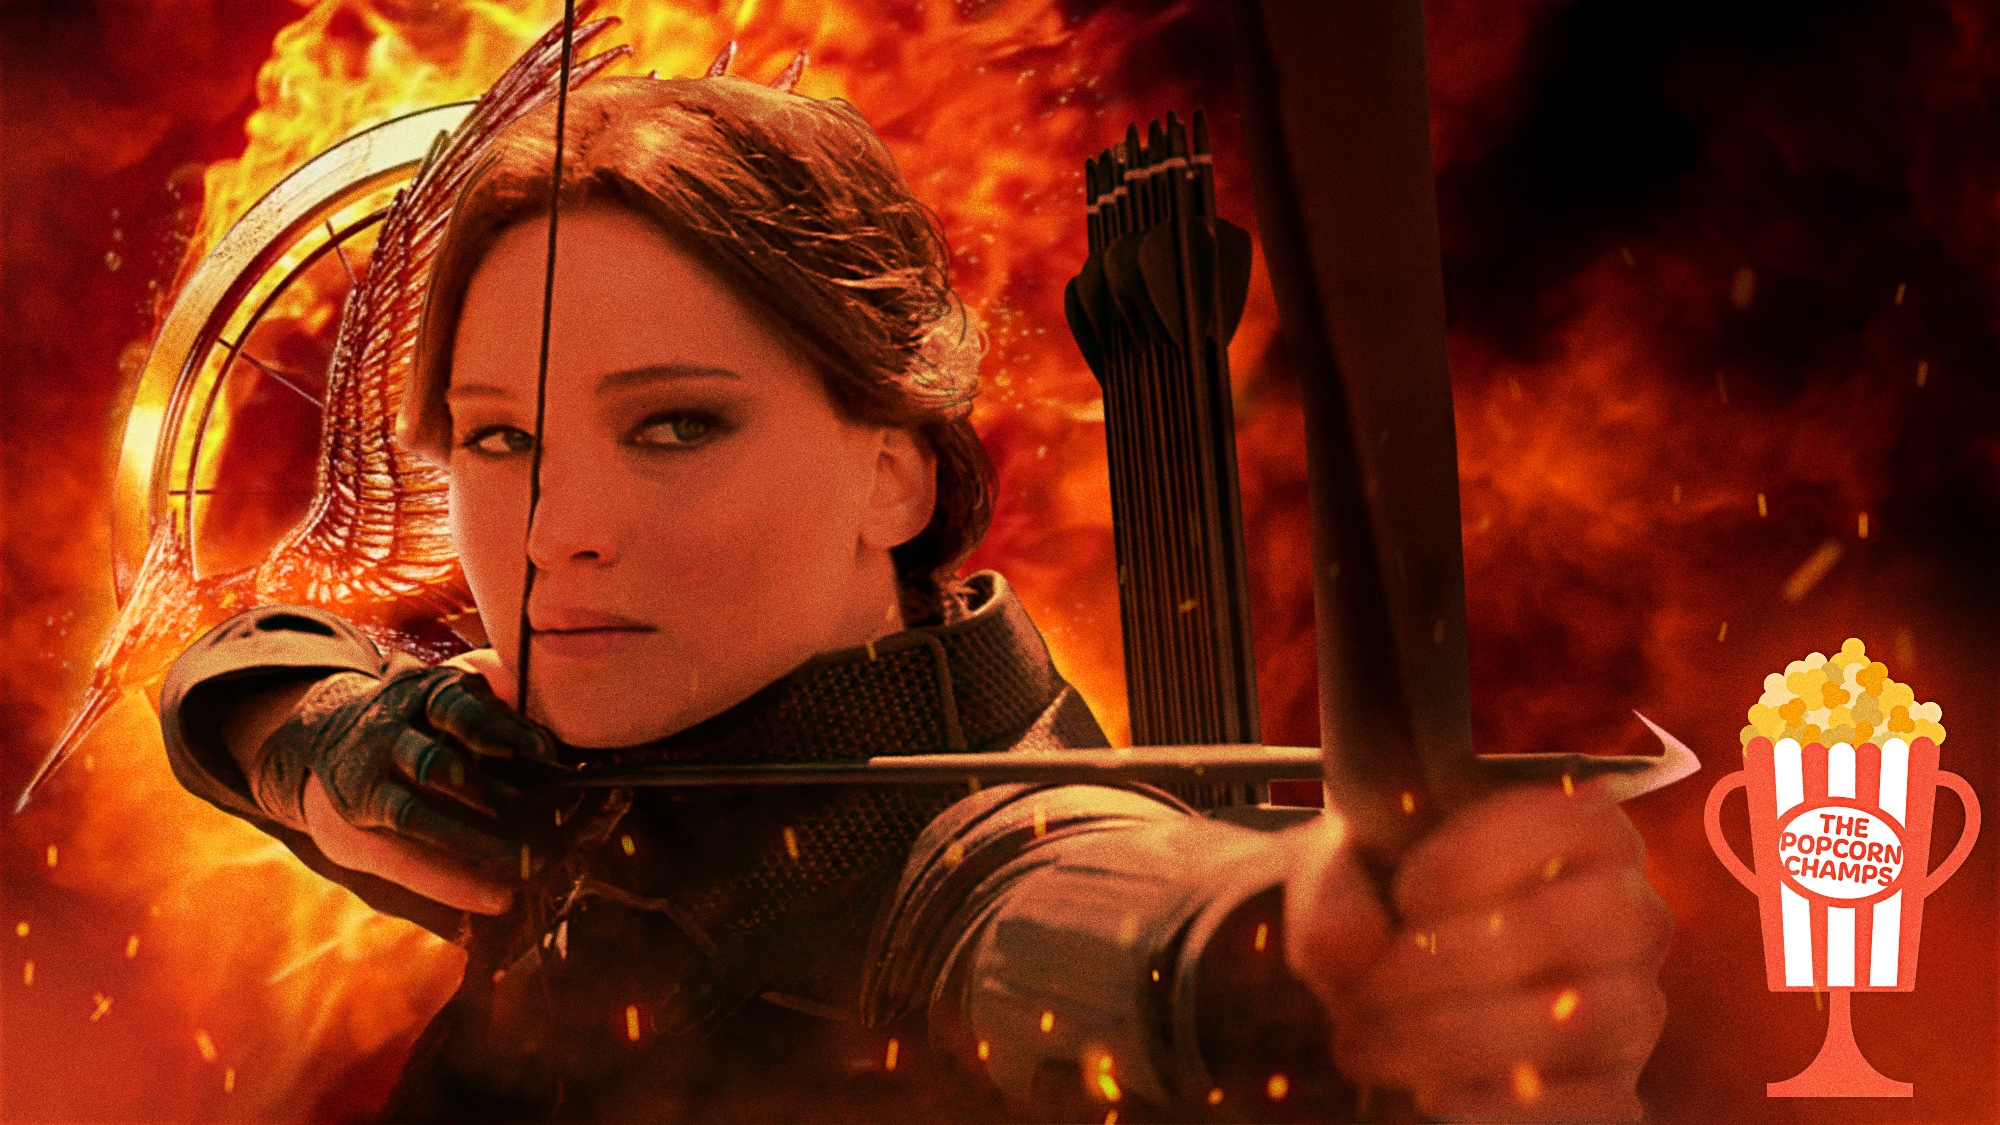 Blockbusters don’t get much bleaker than the kids-killing-kids spectacle of The Hunger Games